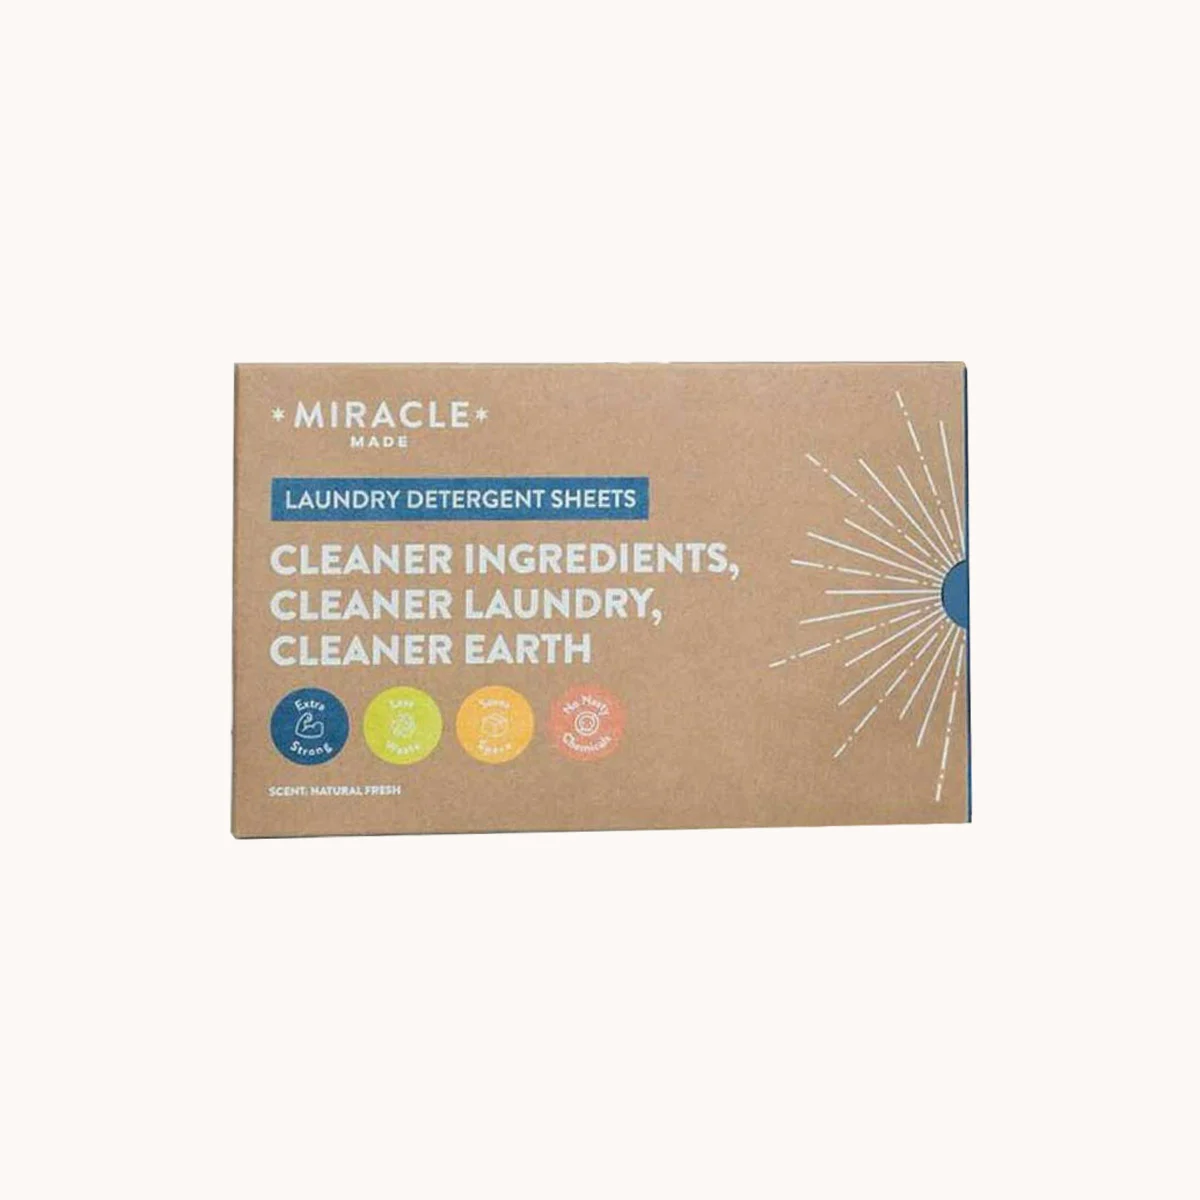 Miracle Laundry Detergent Sheets Reviews - Read Before You Buy!